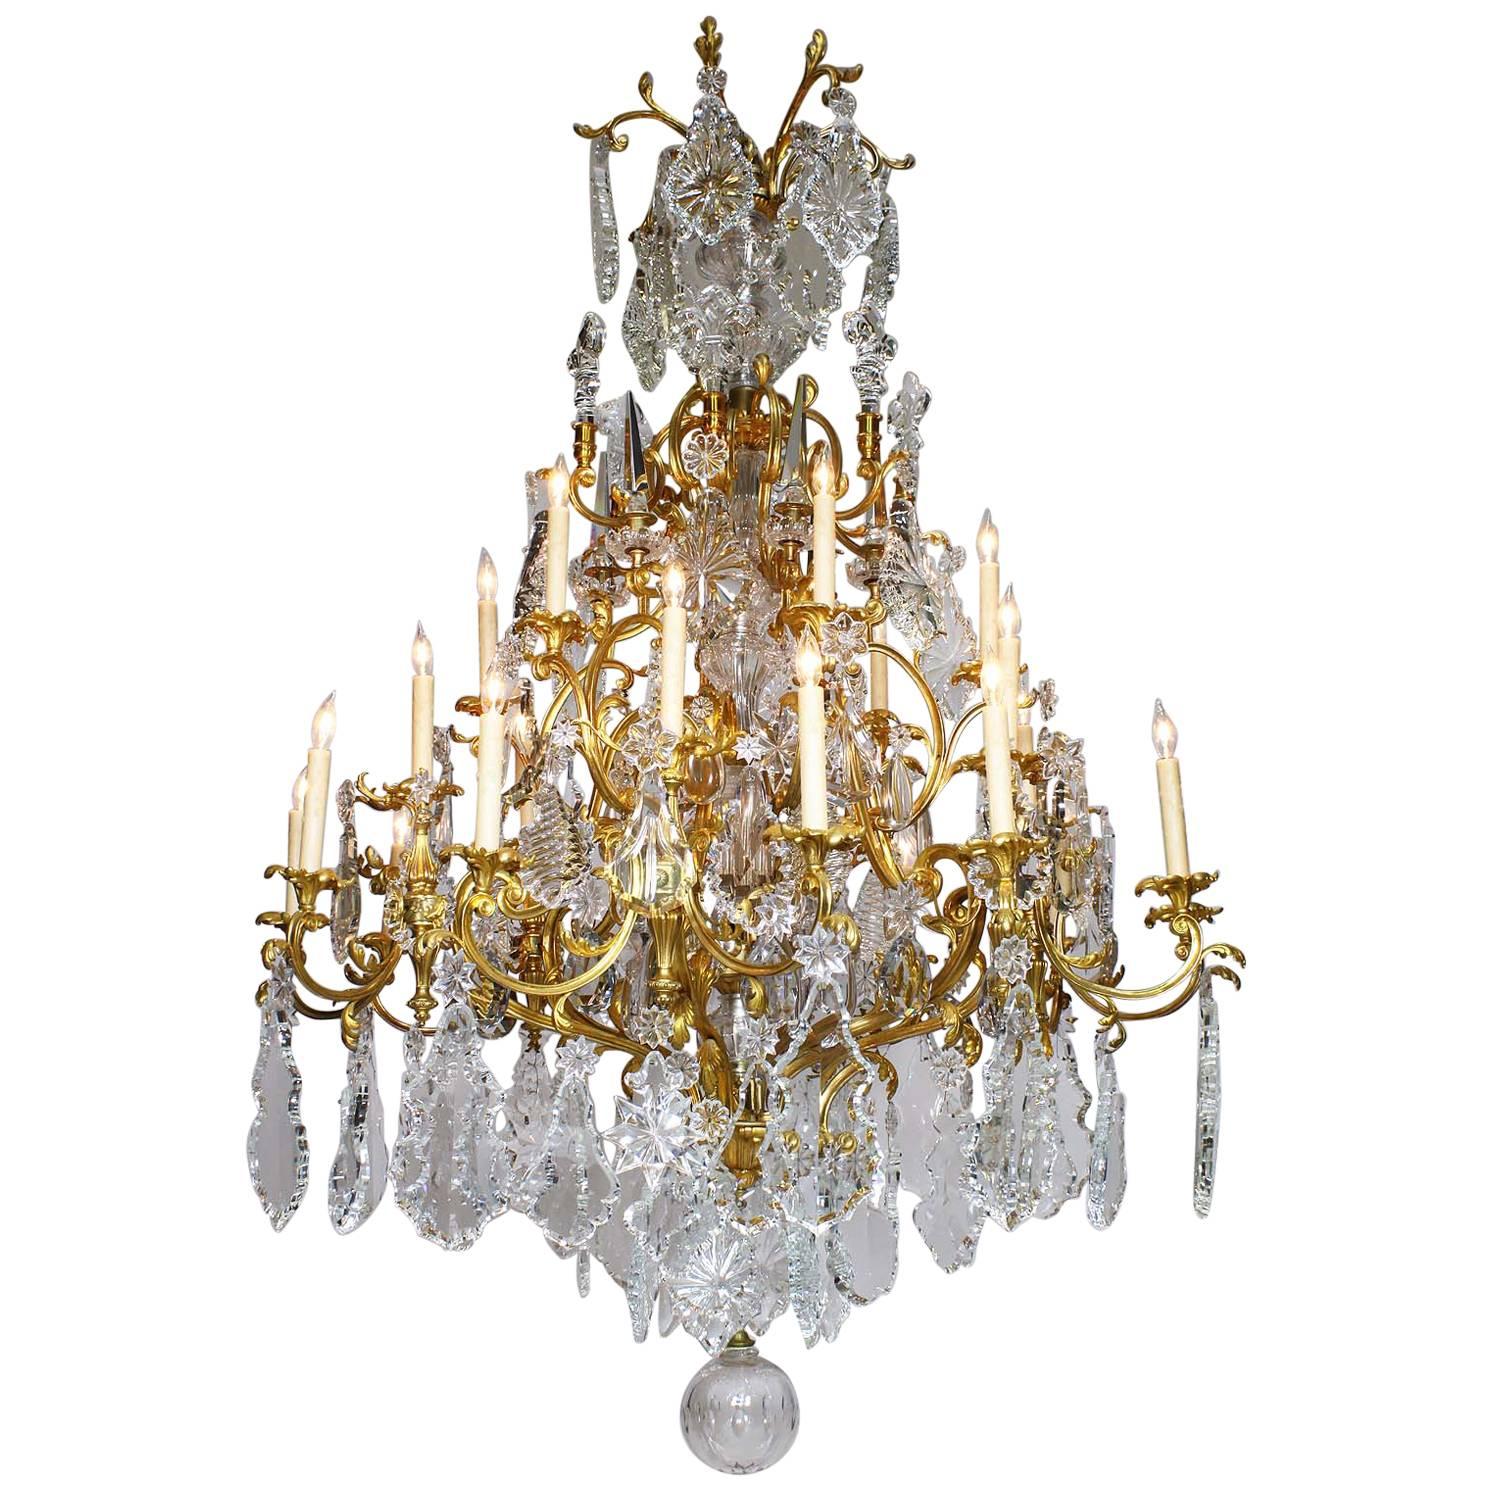 French 19th Century Louis XV Style Gilt-Bronze Crystal Chandelier Attr. Baccarat